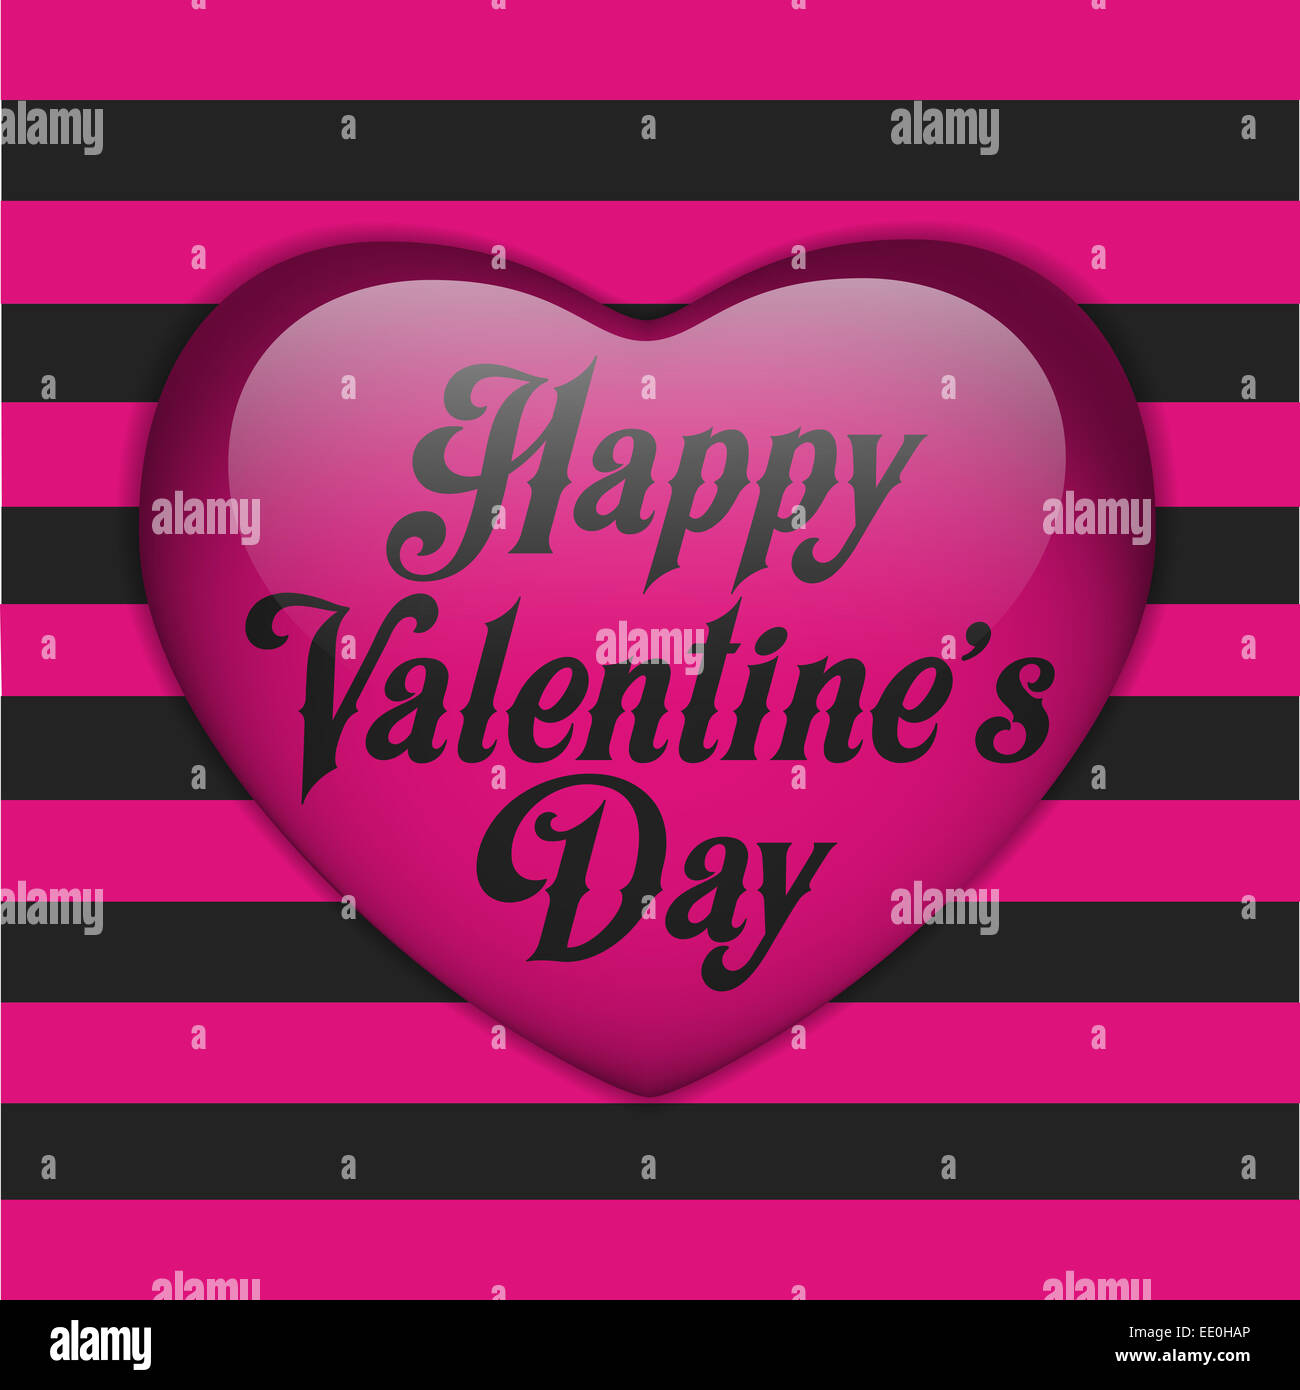 Vector - Glossy Emo Heart. Pink and Black Stripes Stock Photo